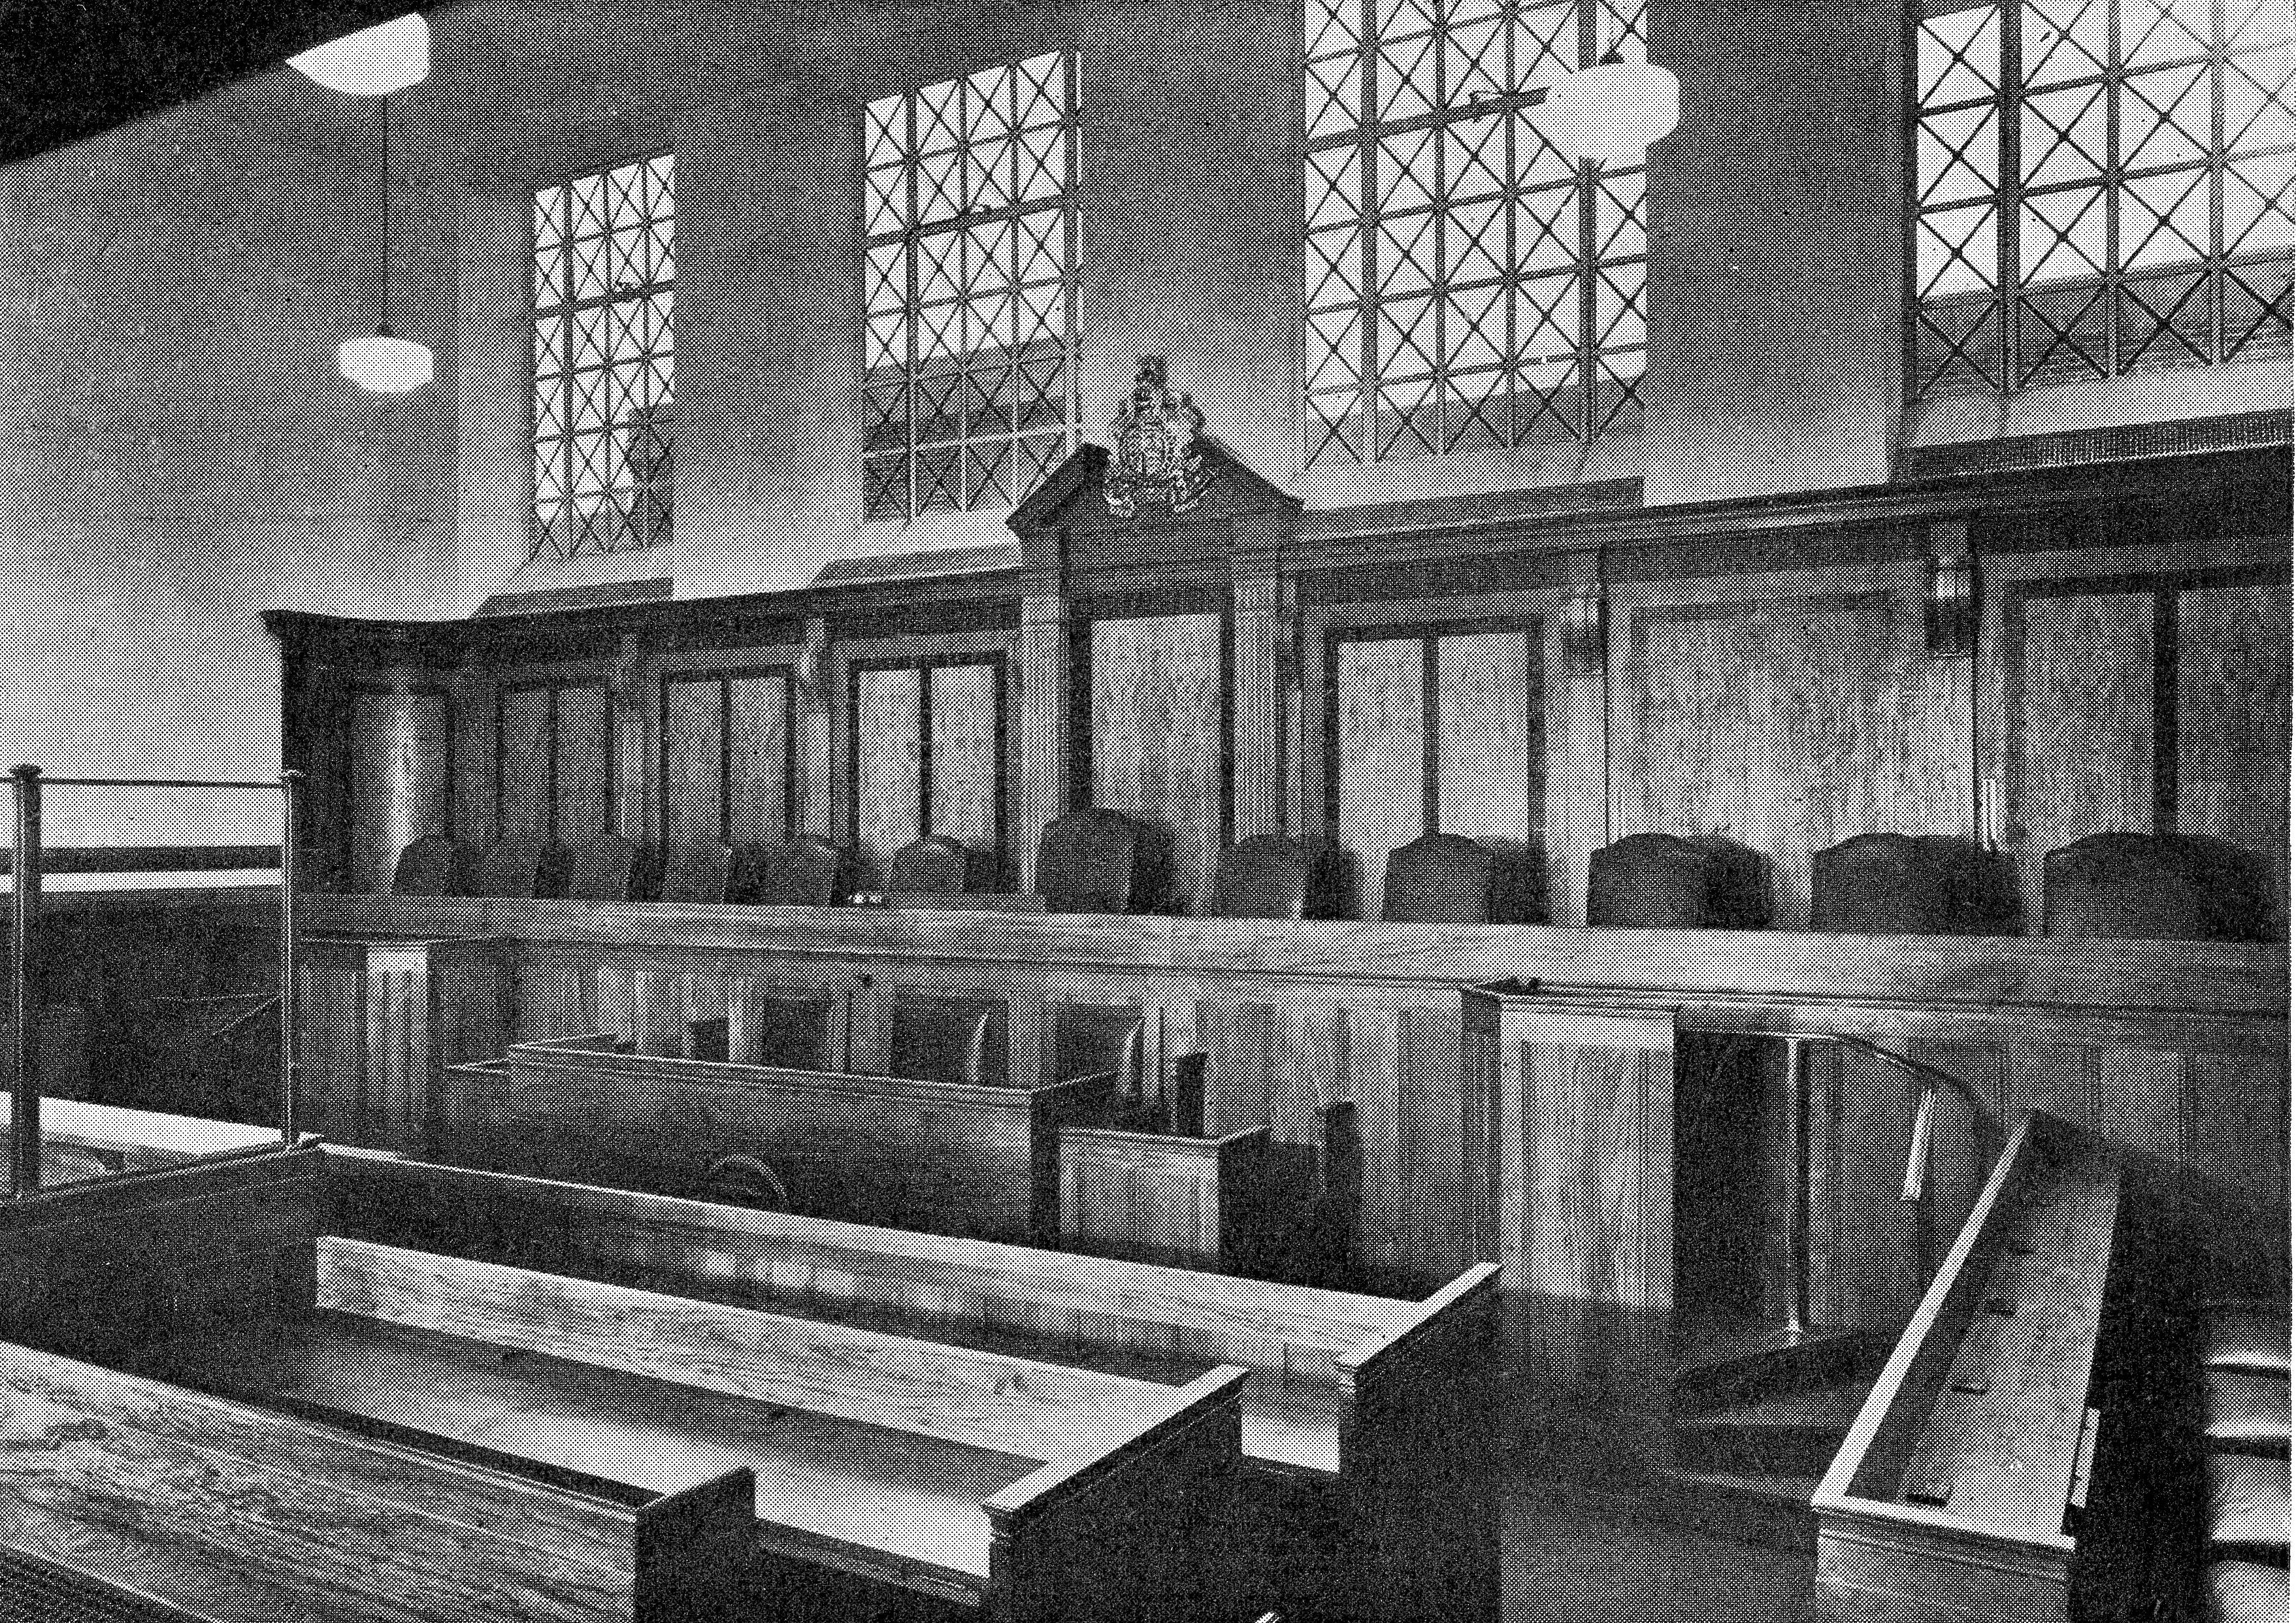 Main magistrates court room in Guildhall, Kingston Upon Thames